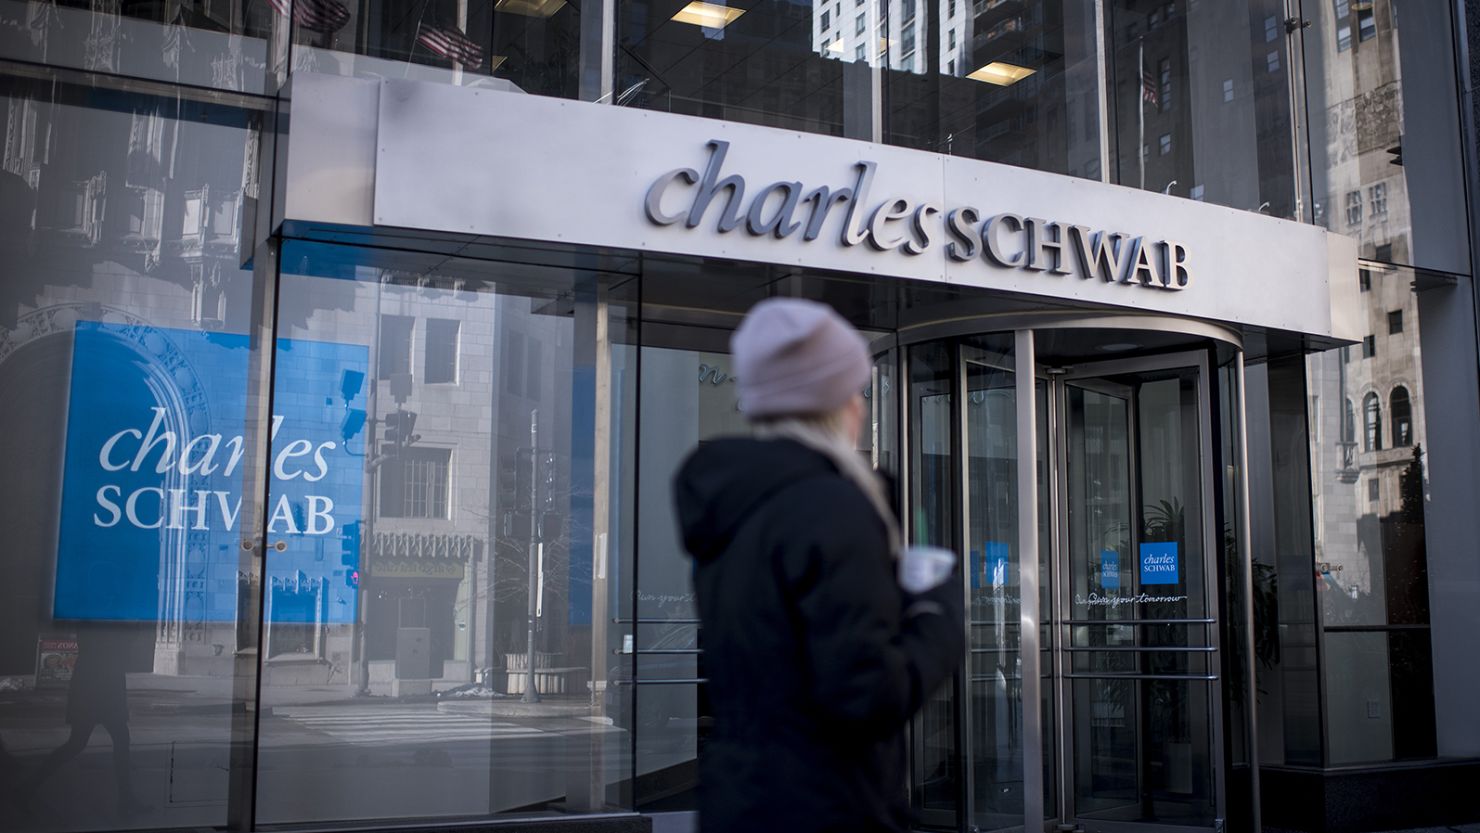 A pedestrian passes in front of a Charles Schwab Corp. bank branch in downtown Chicago, Illinois, U.S., on Monday, Jan. 8, 2018.